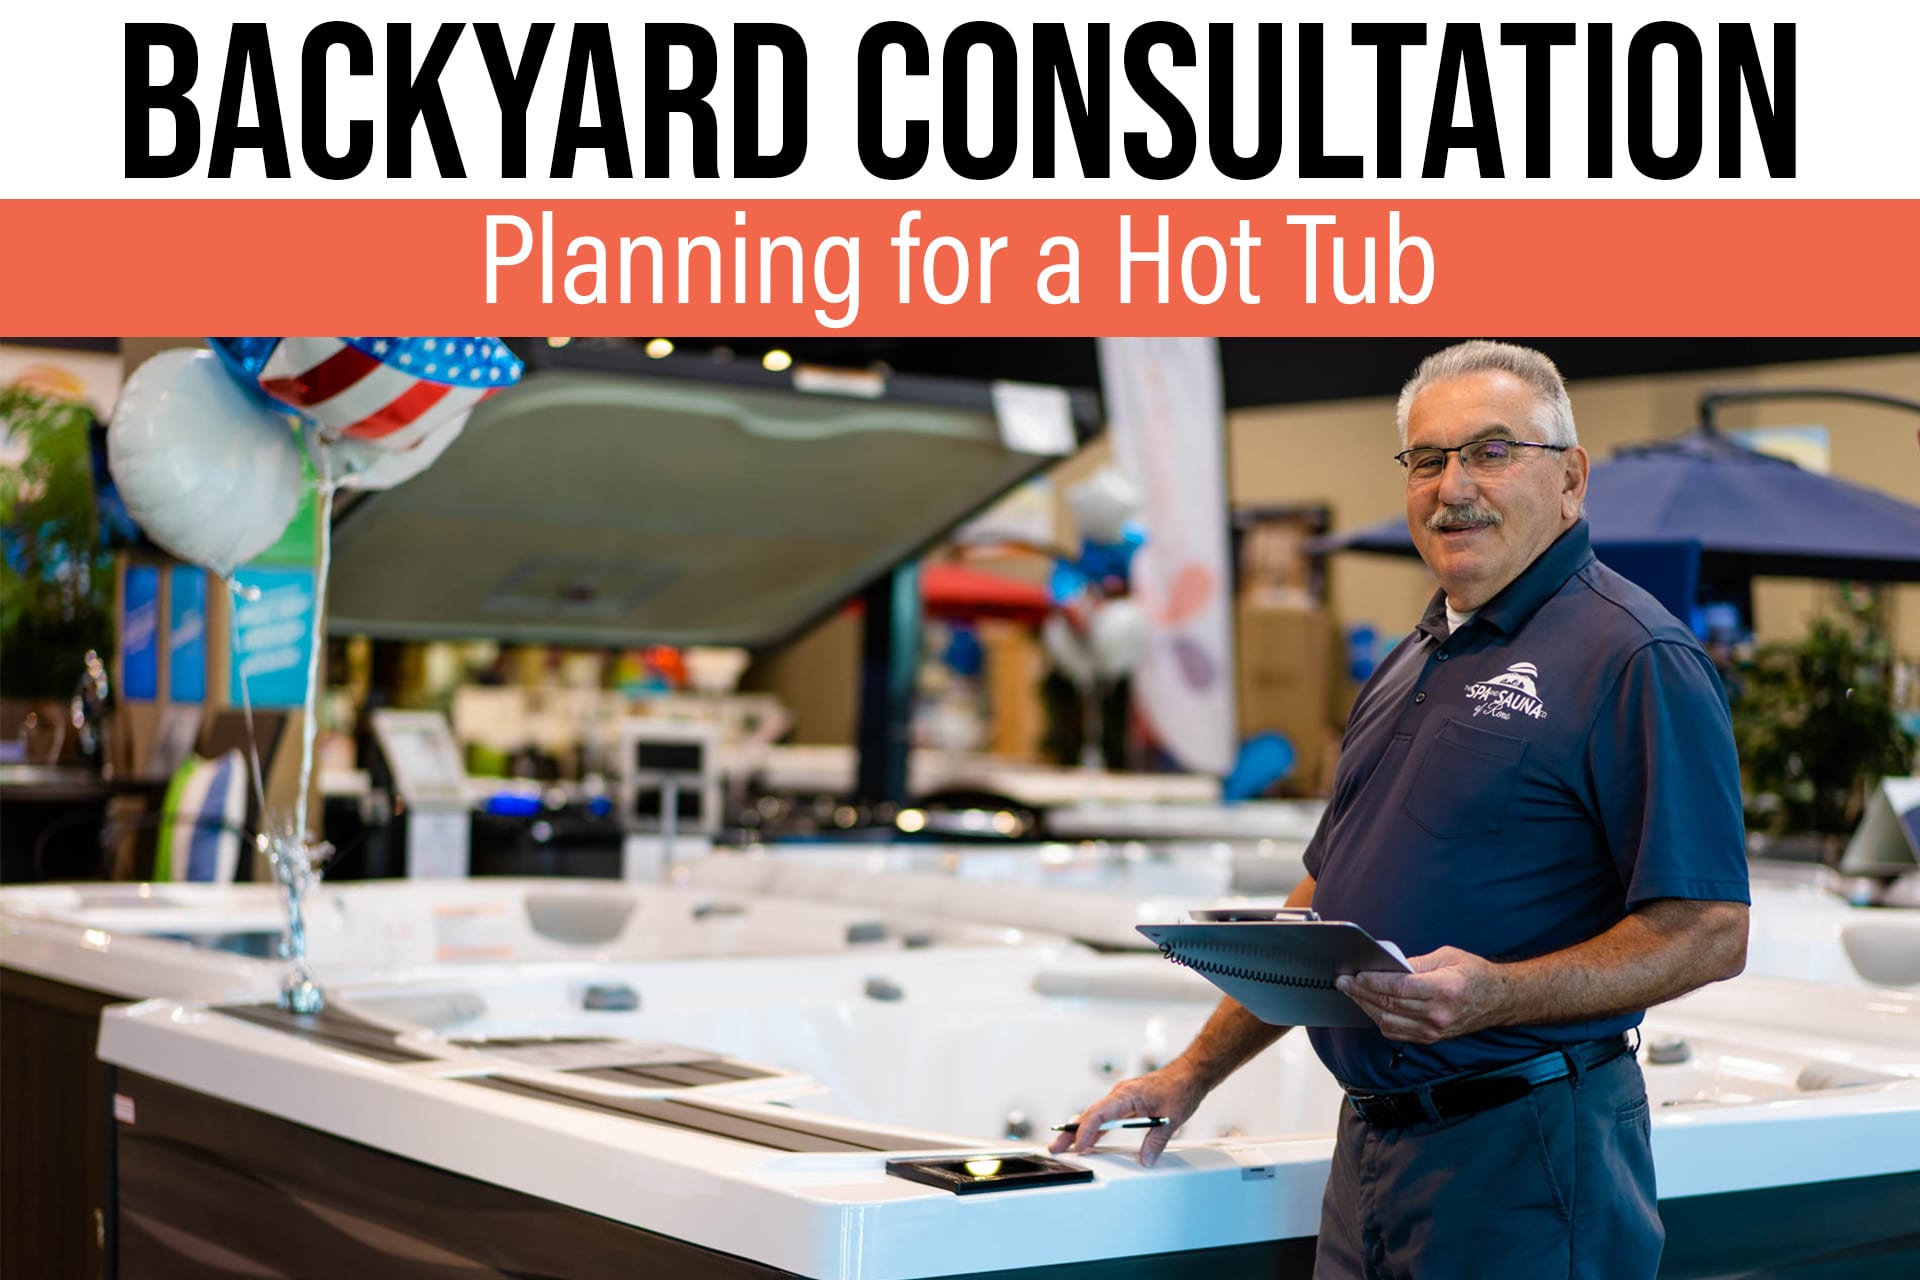 Backyard Consultation – Planning for a Hot Tub